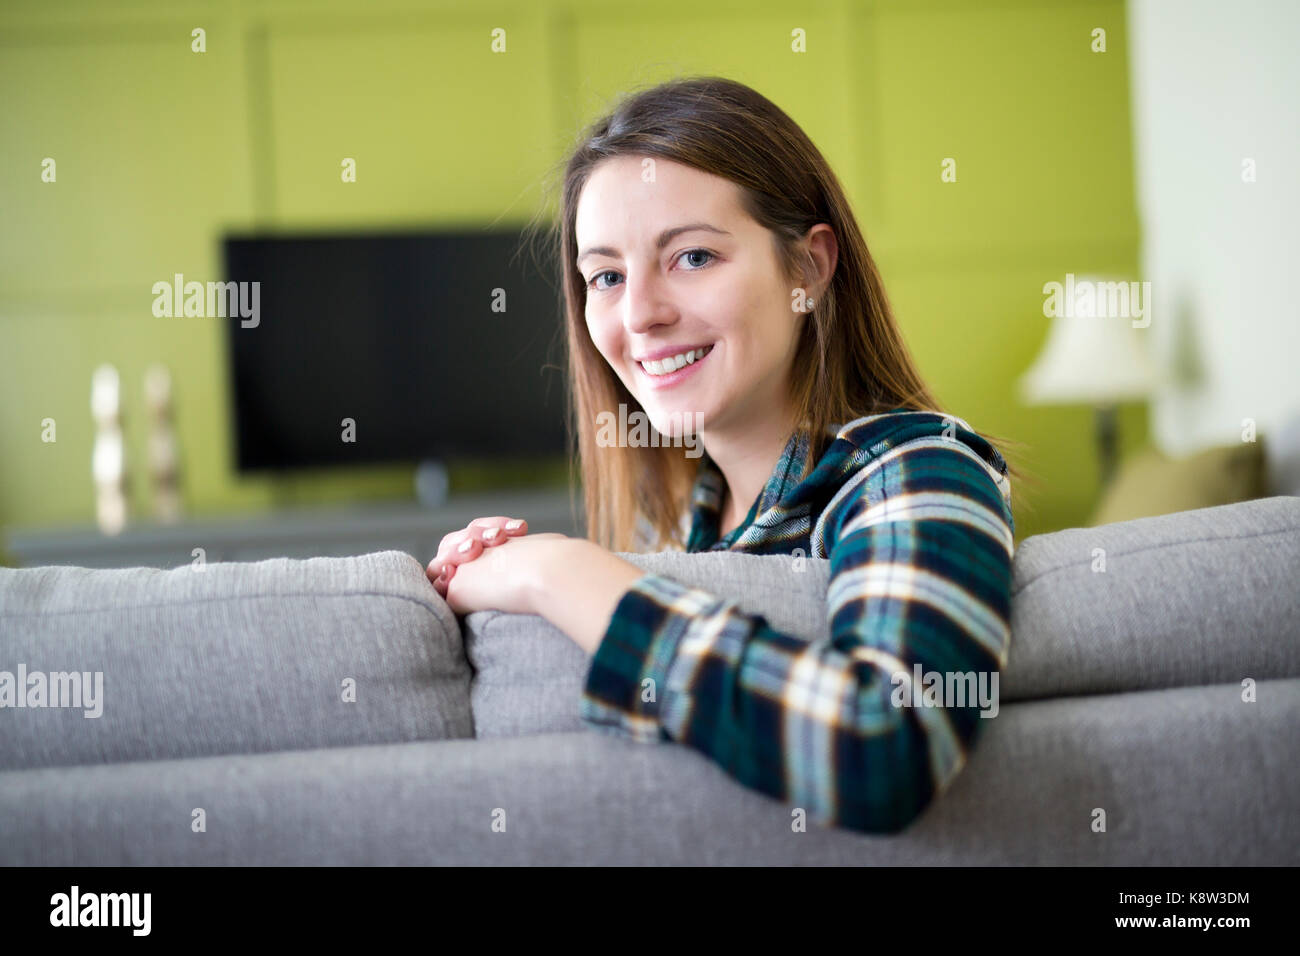 Beautiful woman watching TV sitting on couch at home Stock Photo